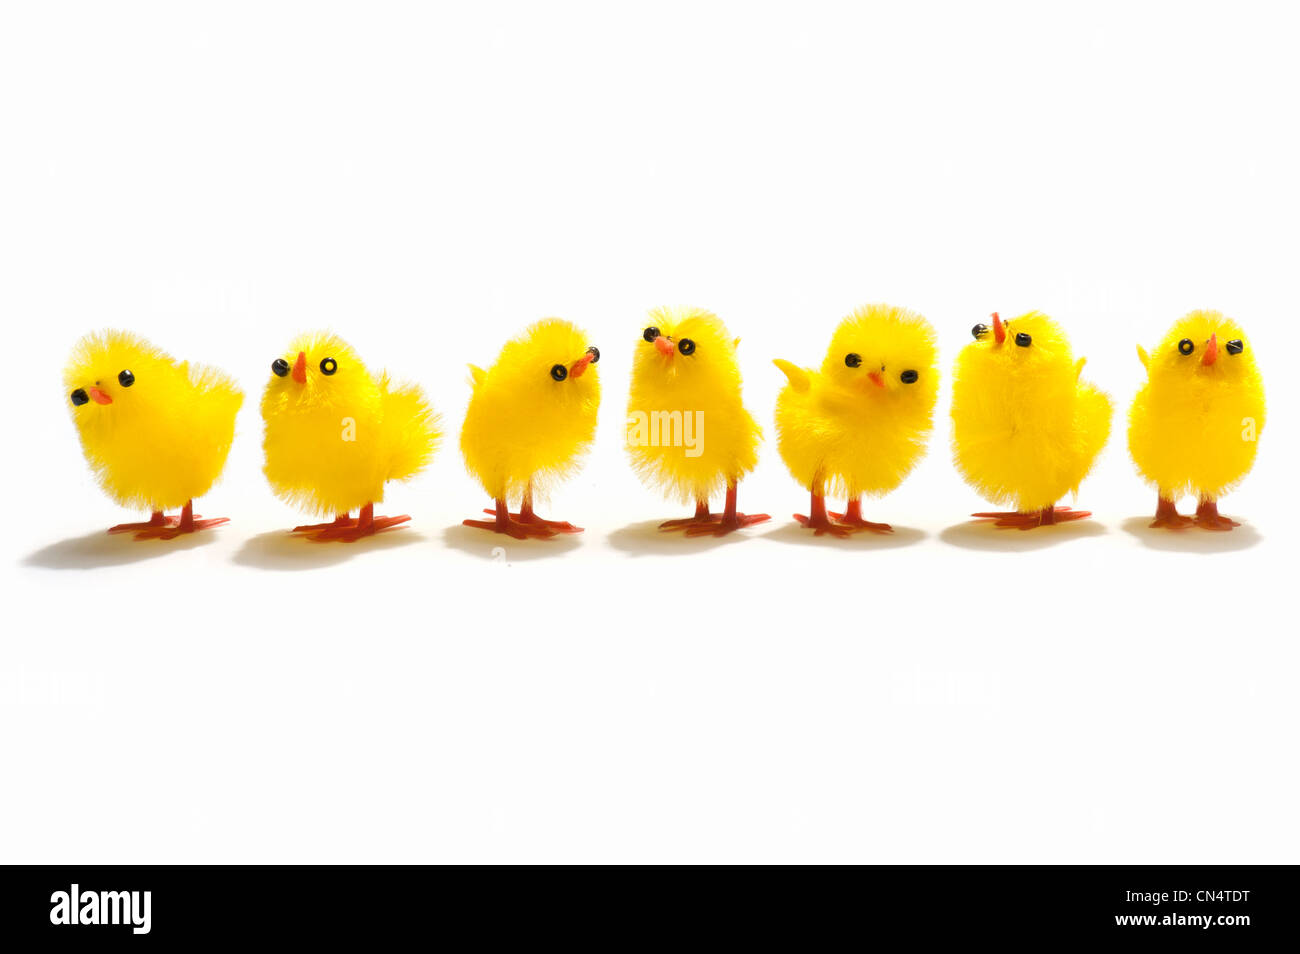 A group of Easter chick decorations Stock Photo